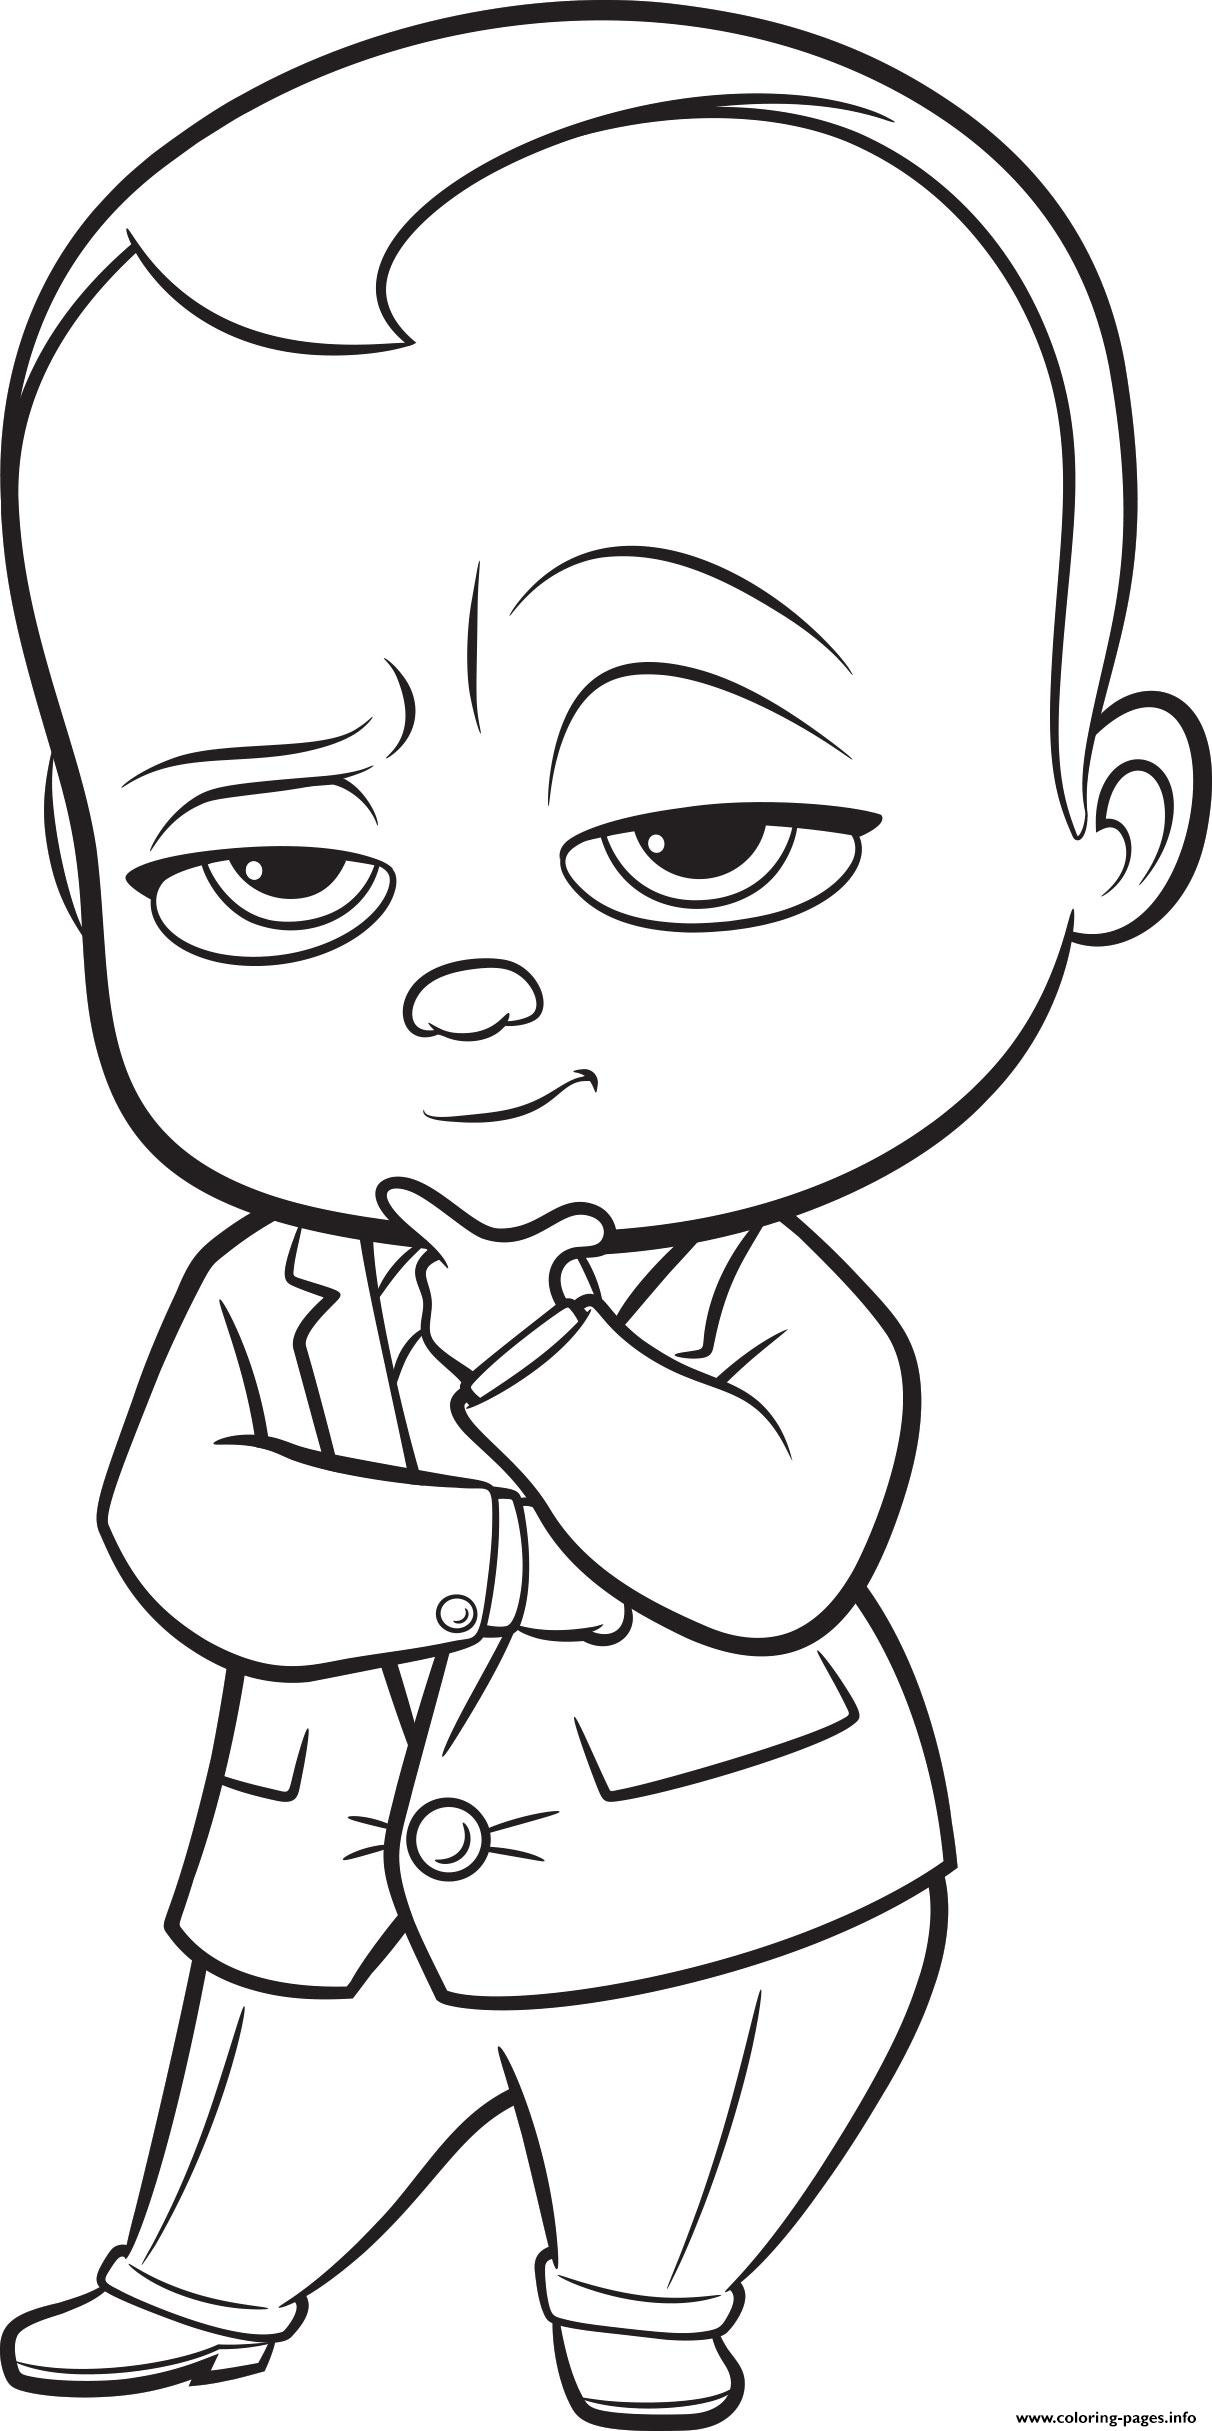 Boss Baby Coloring Pages
 Coloriage Baby Boss pour Enfants Coloring Page For Kids